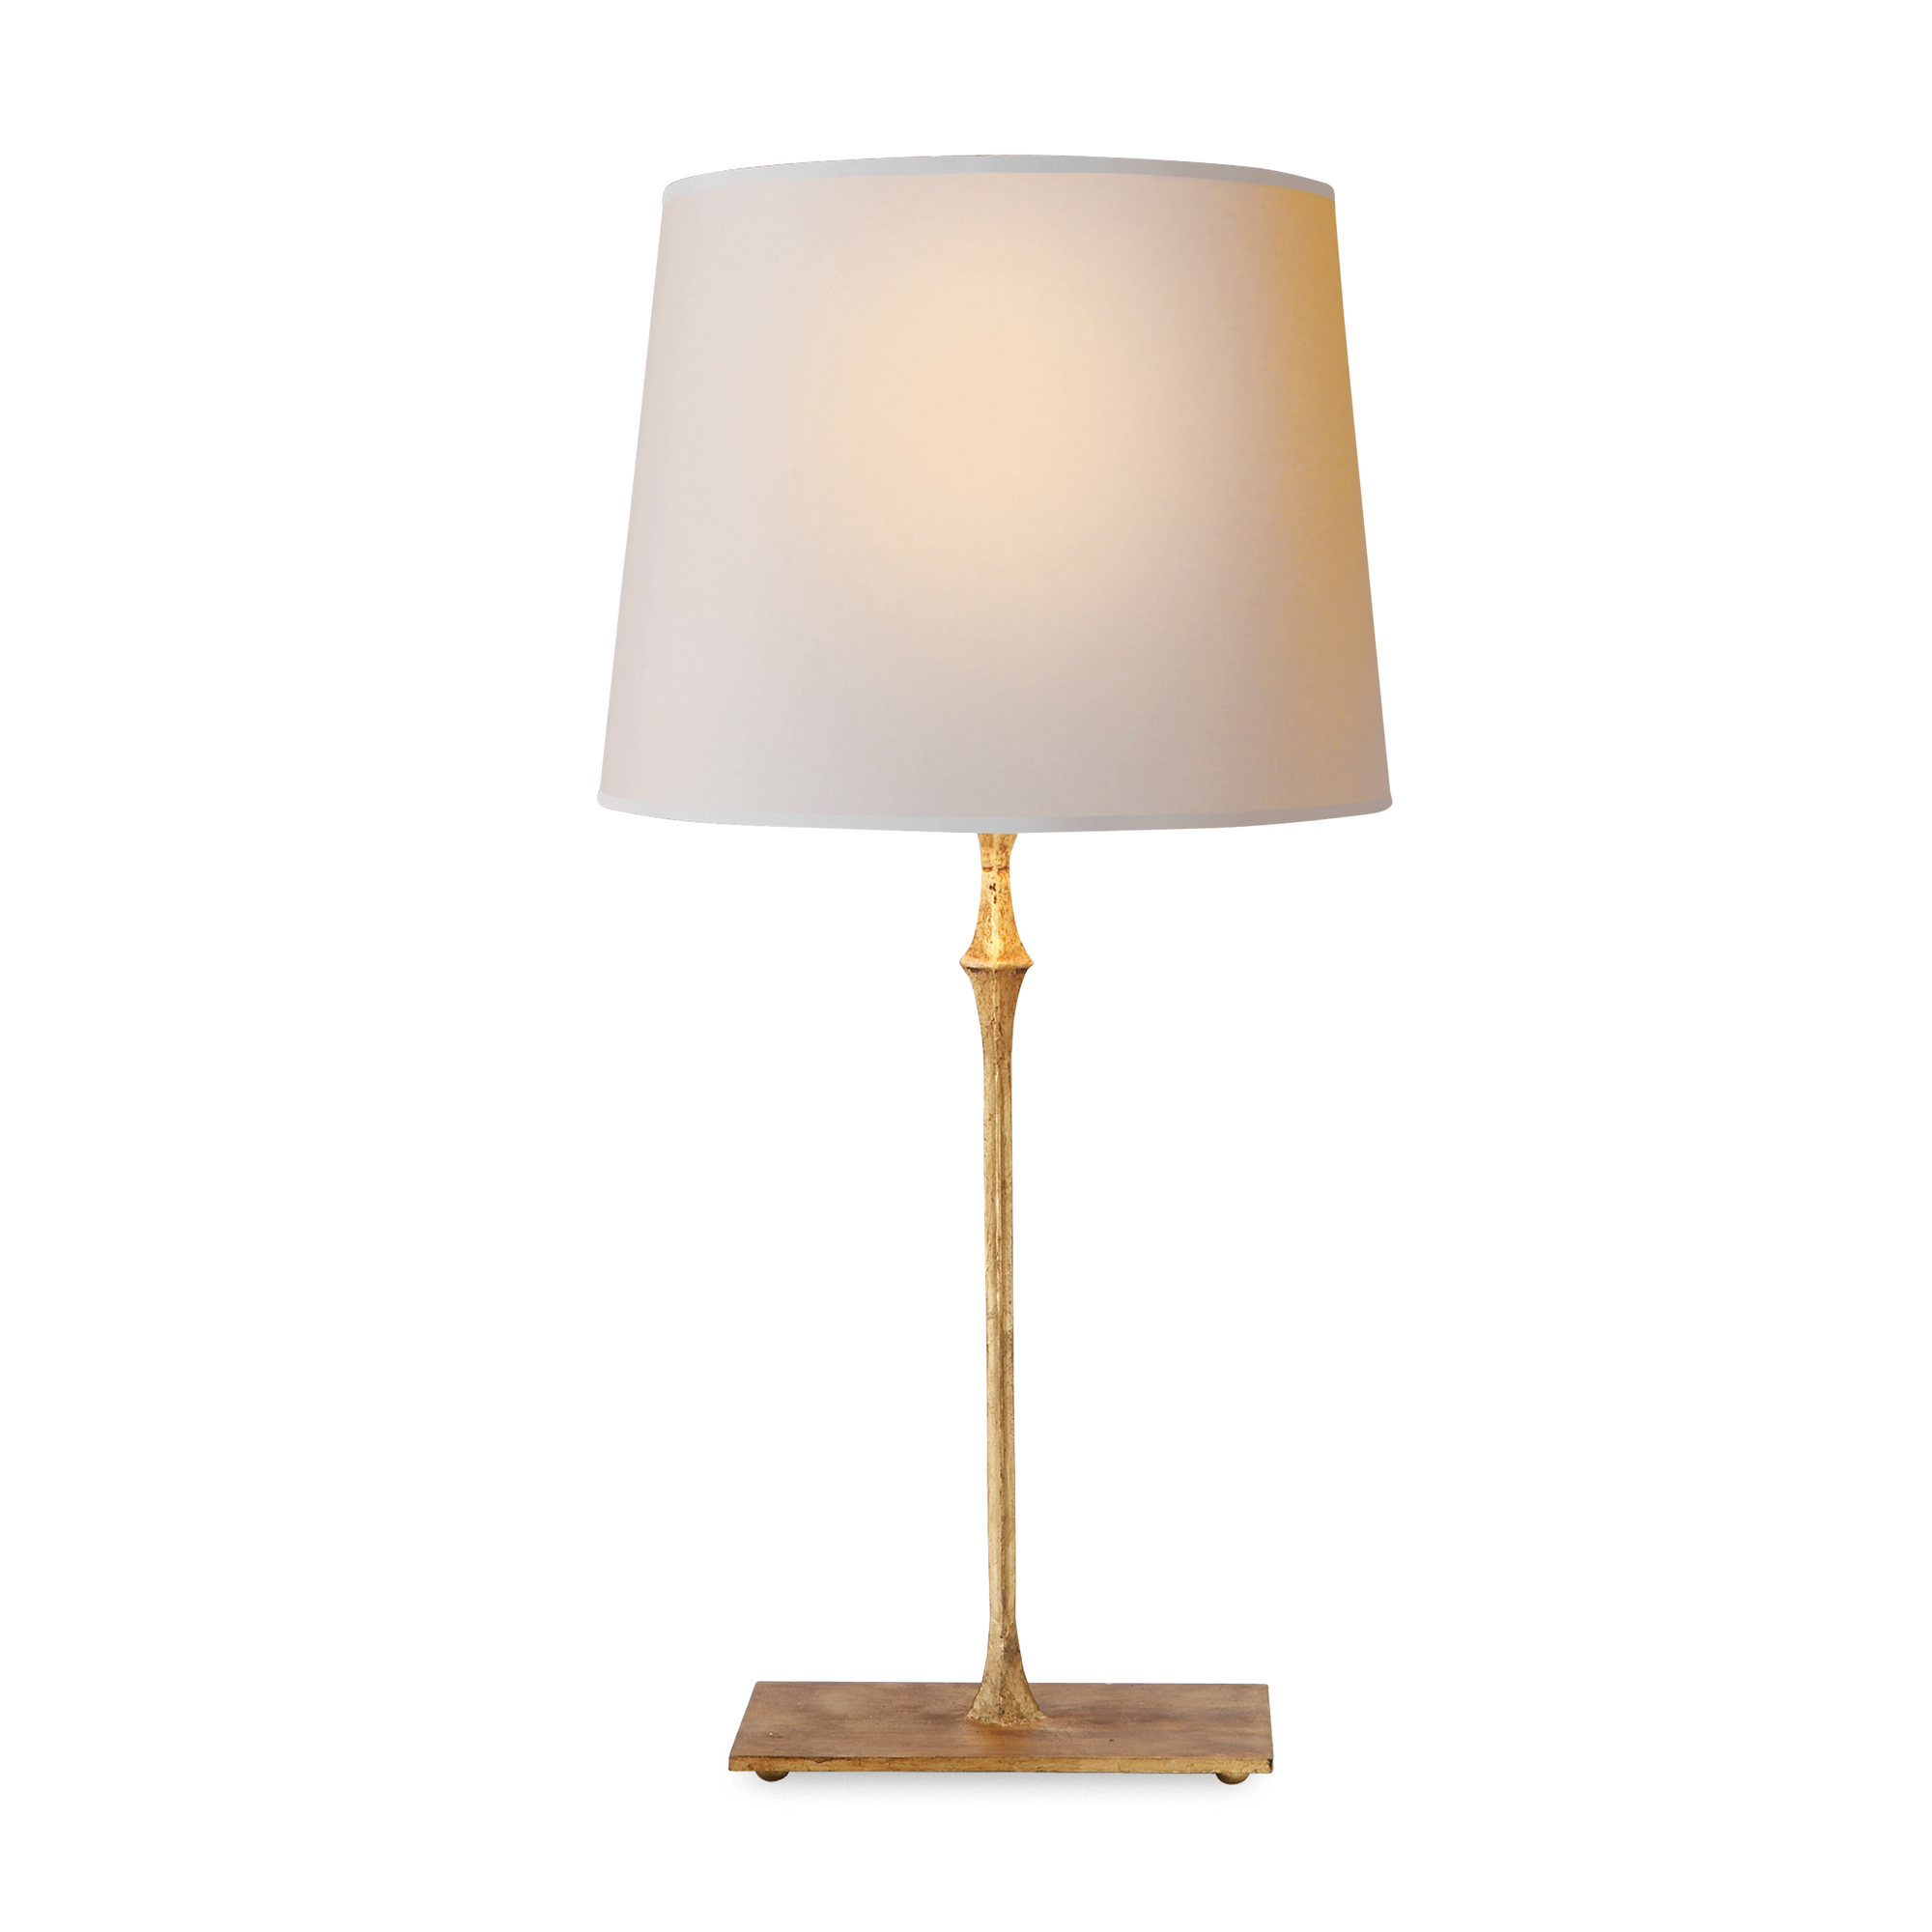 Gilded iron table lamp with a natural paper shade.